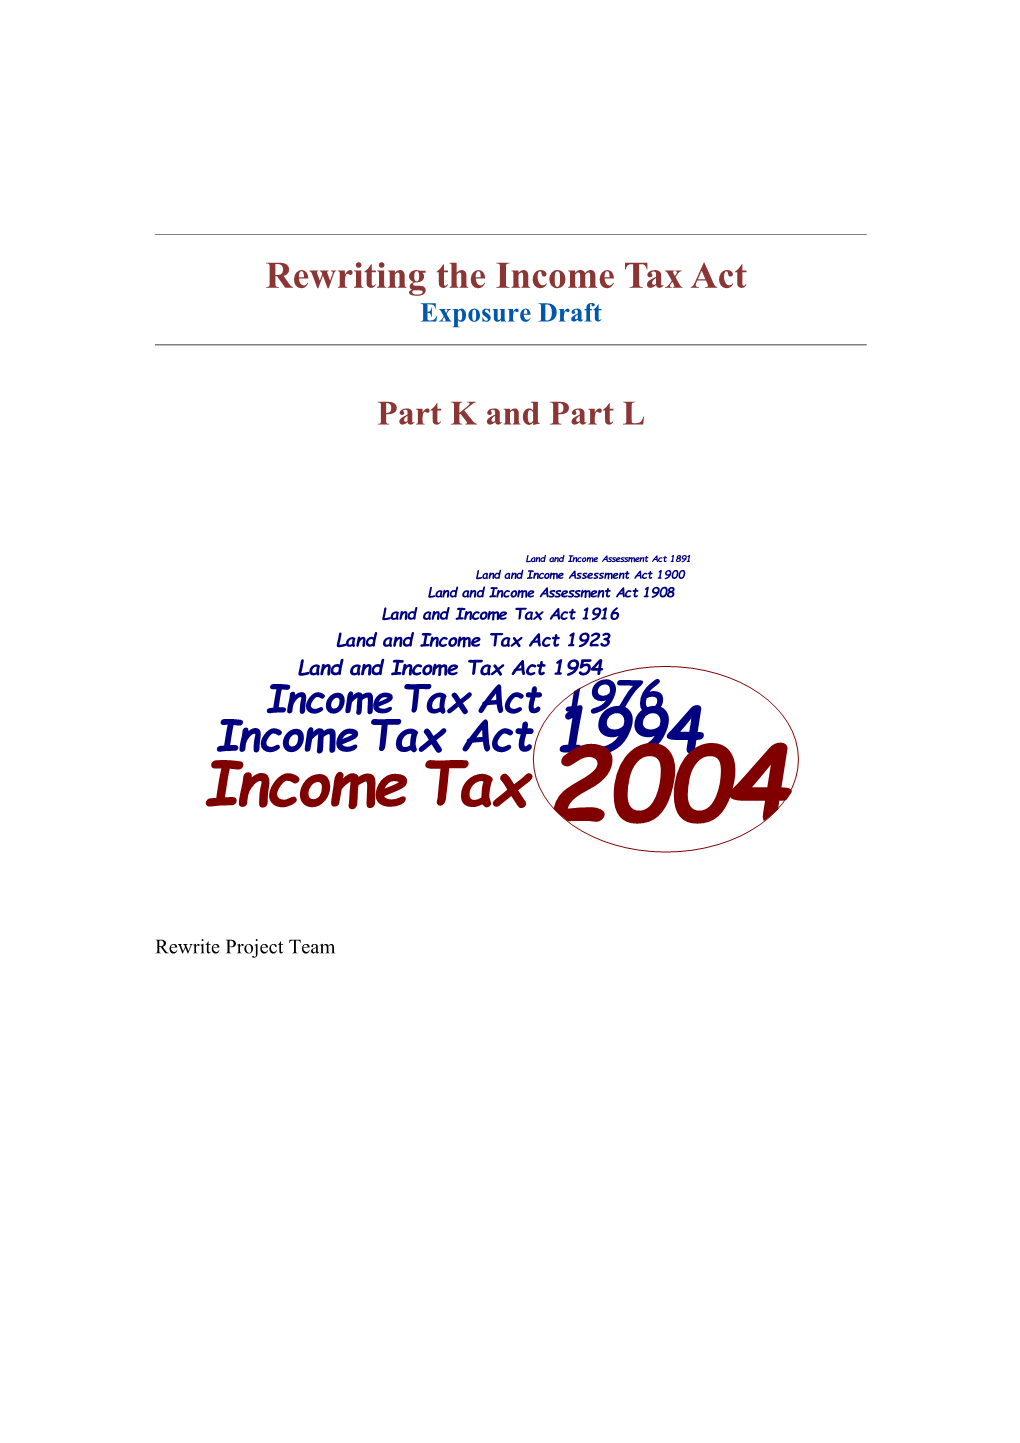 Rewriting the Income Tax Act - Exposure Draft - Parts K and L Commentary